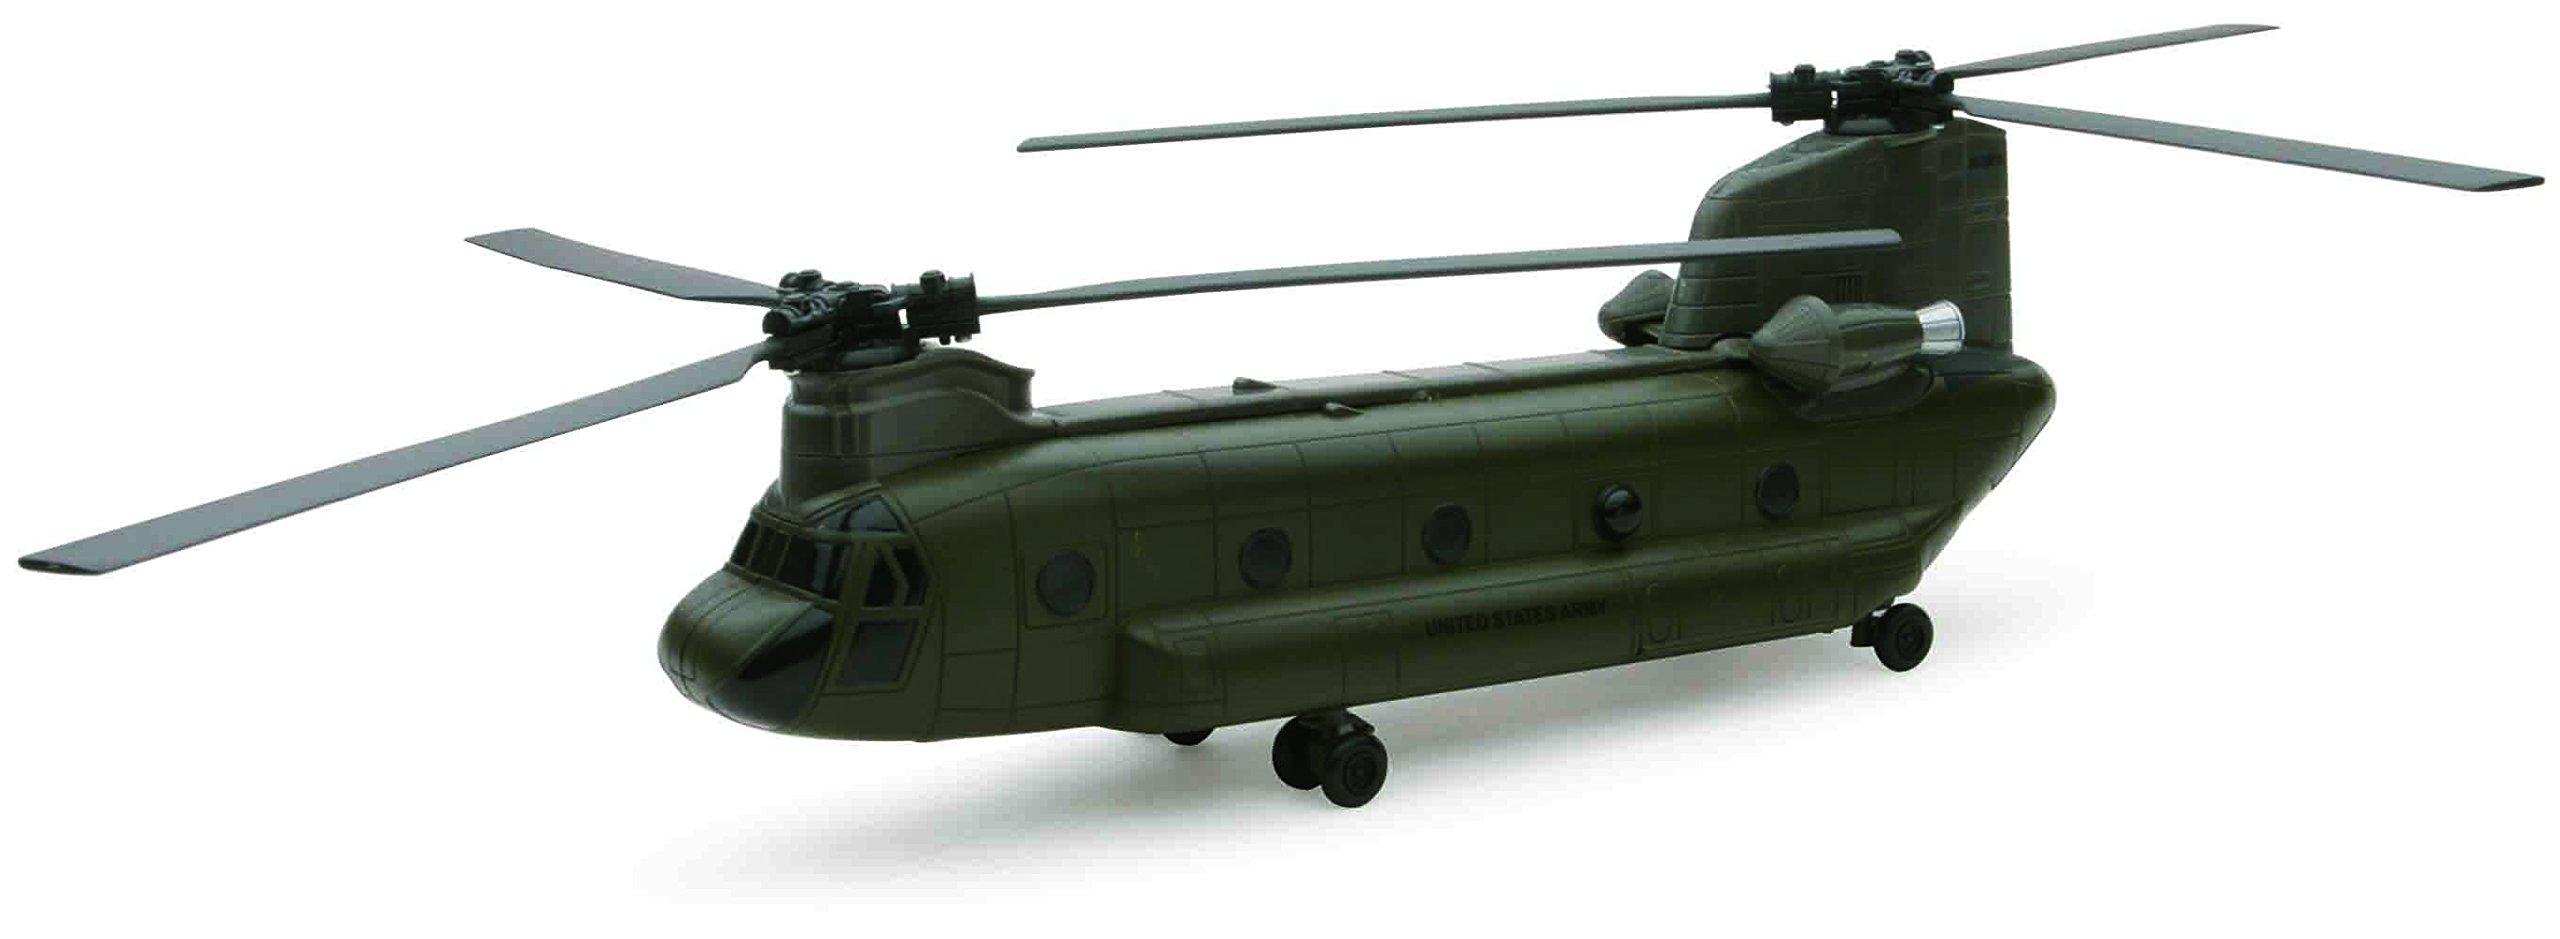 Ch 47 Rc Helicopter: CH 47 RC helicopter: The Ultimate Hobbyist Model